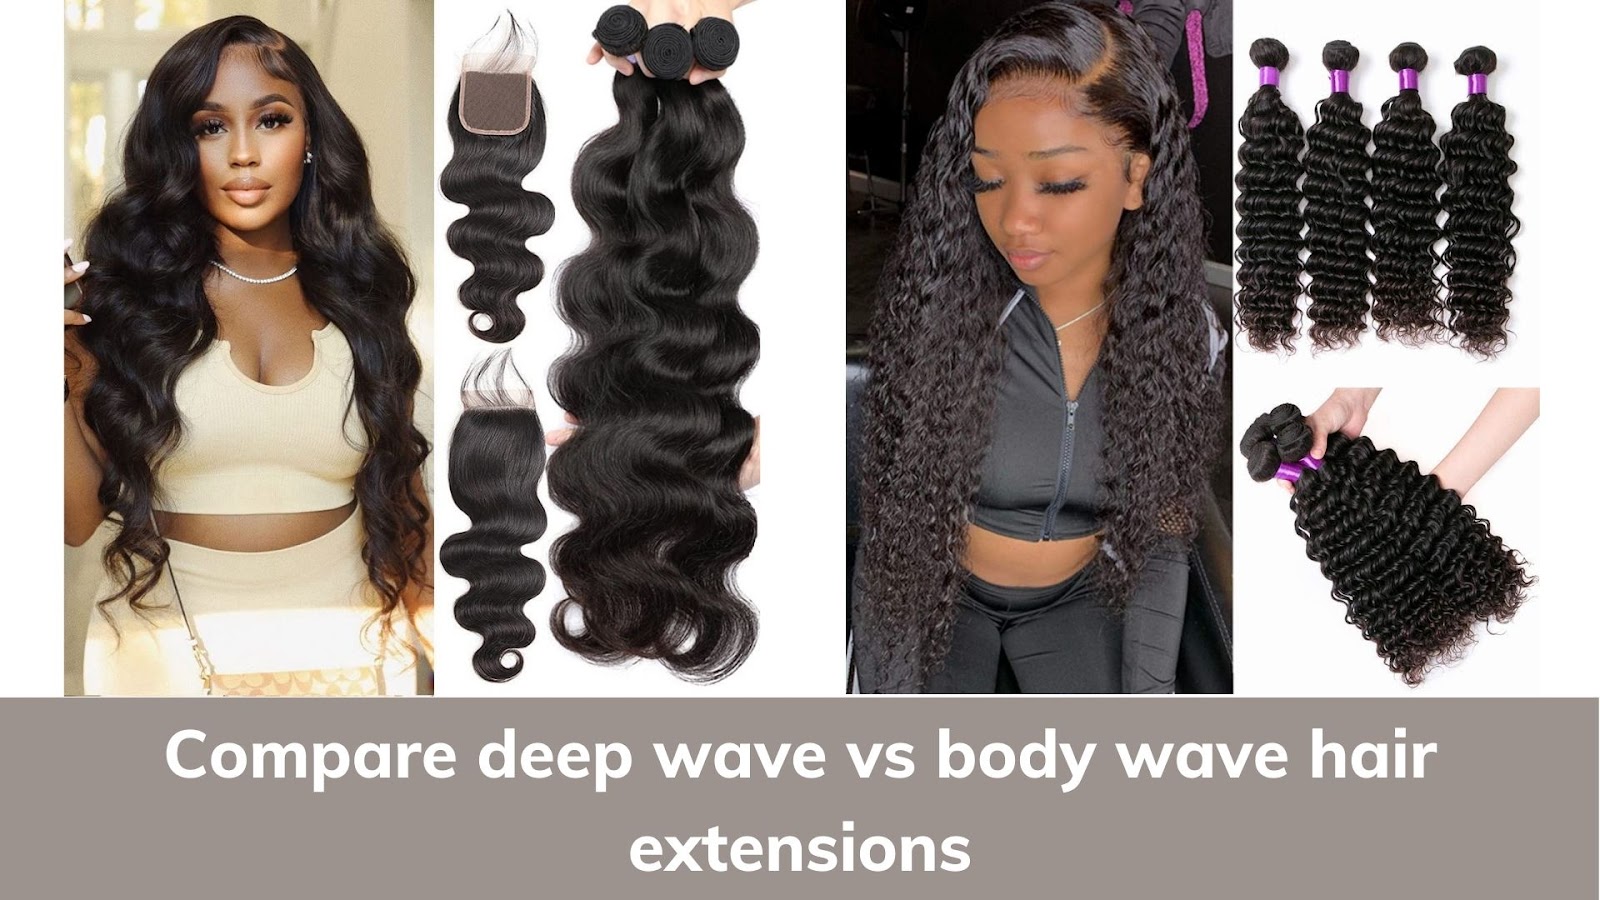 Compare deep wave vs body wave hair extensions